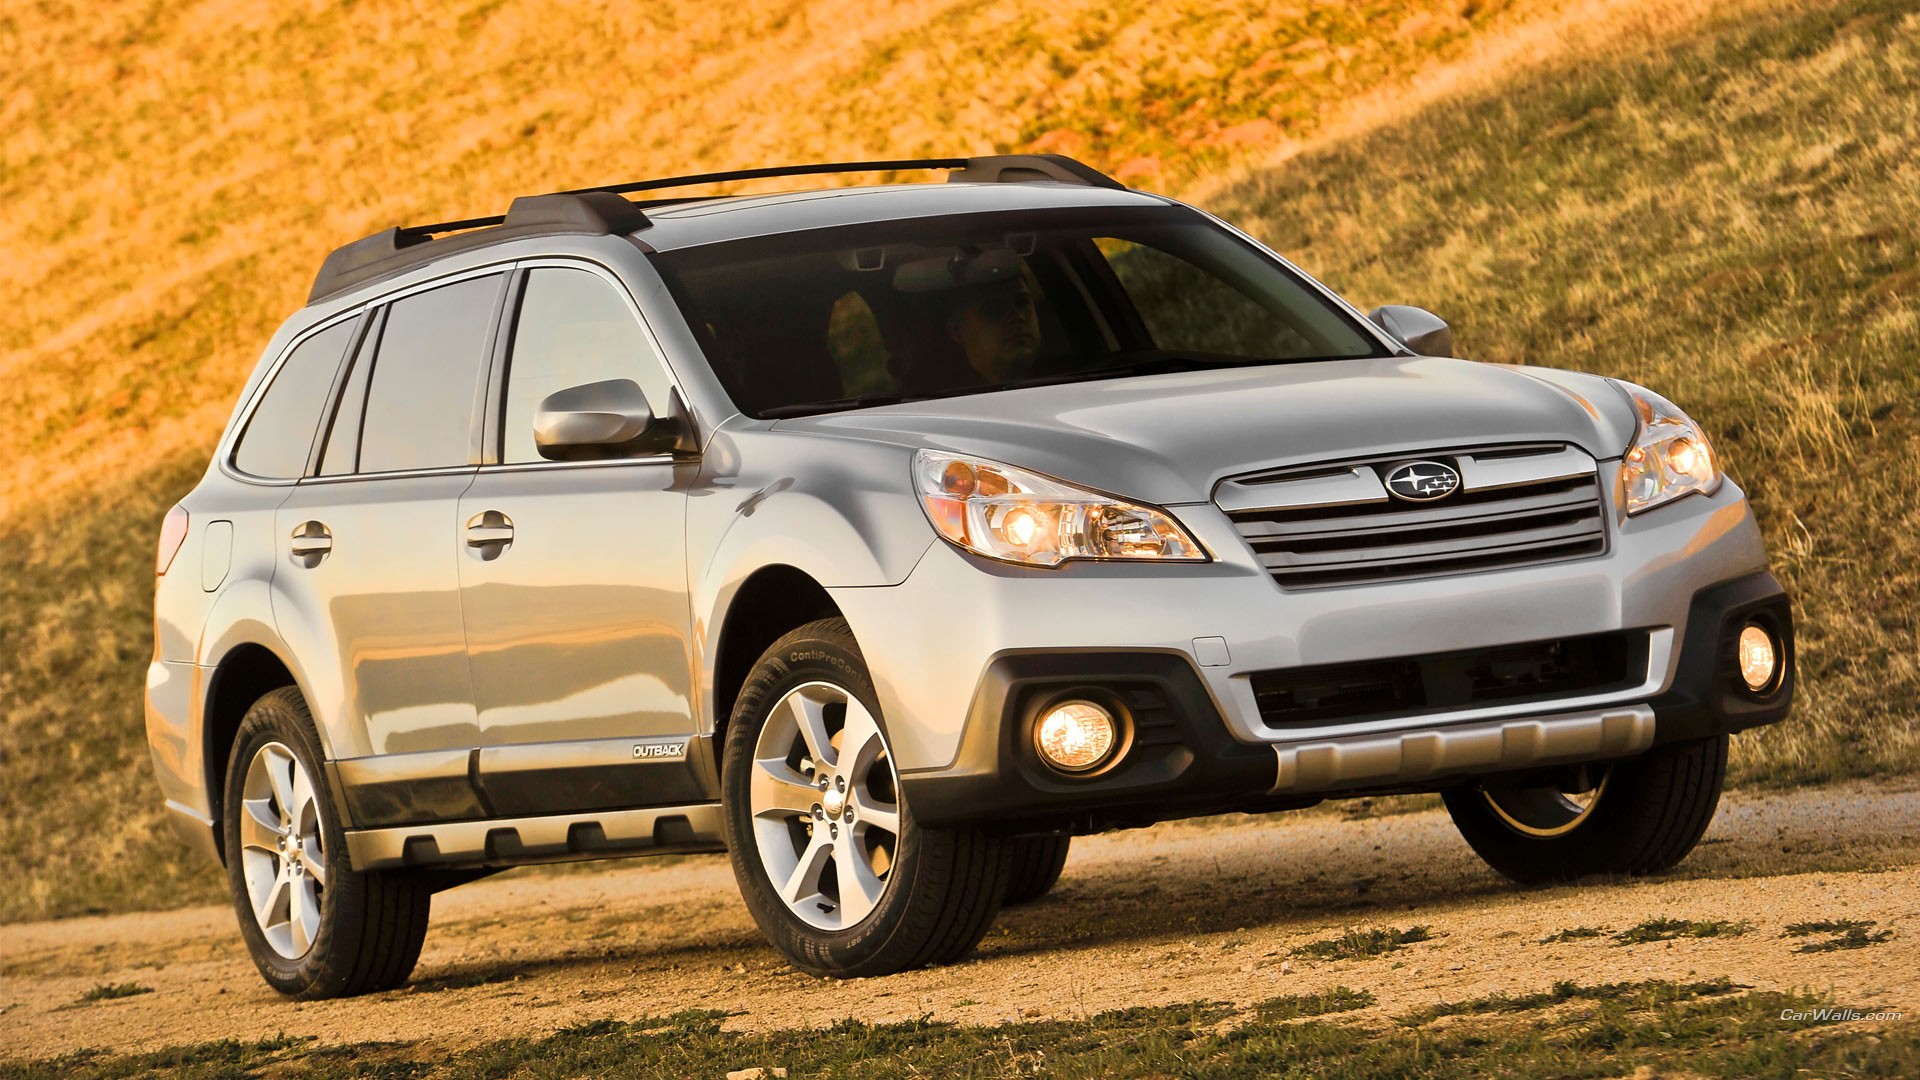 Subaru Outback, Car Wallpapers HD / Desktop and Mobile Backgrounds